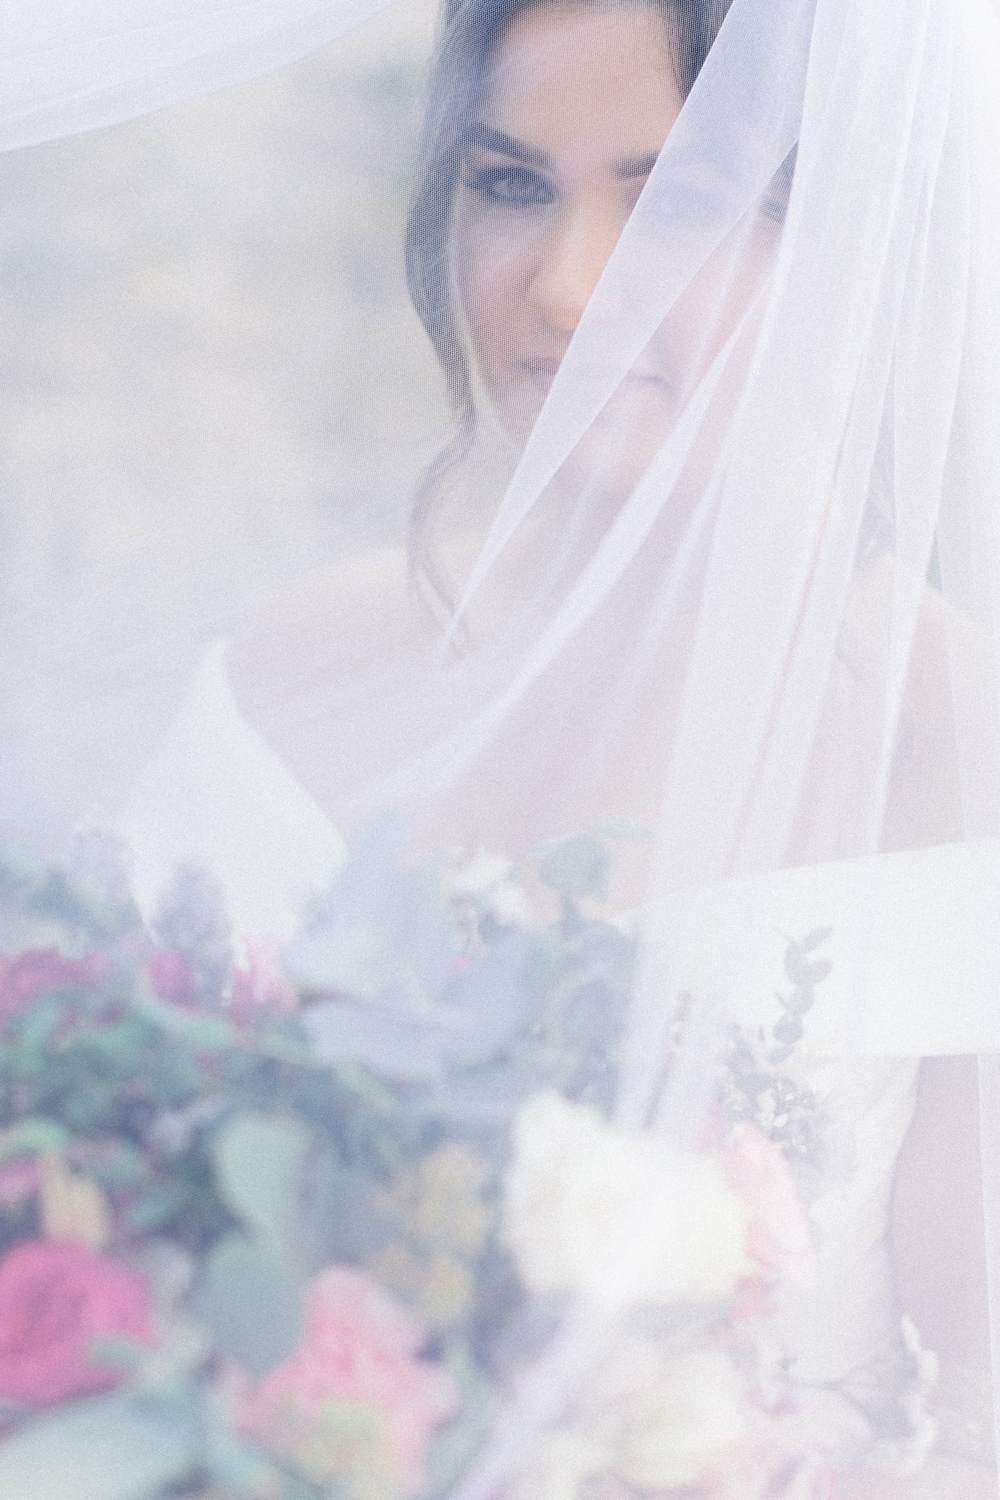 Bride portrait with elegant veil over her face before the wedding ceremony starts